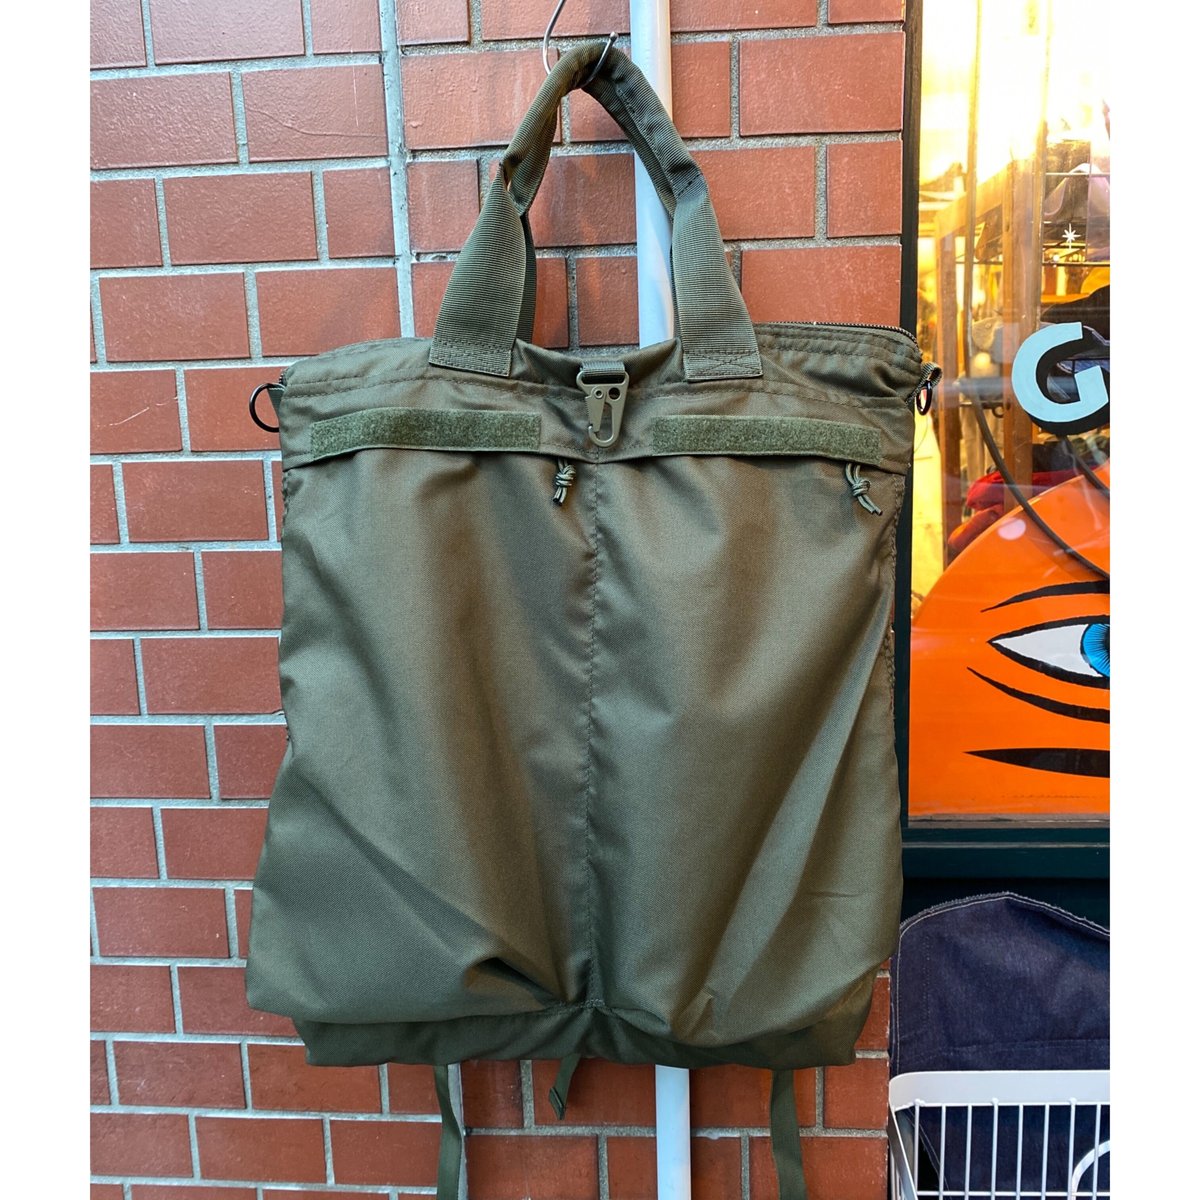 SELECT] US ARMY ヘルメットBAG レプリカ | garden730